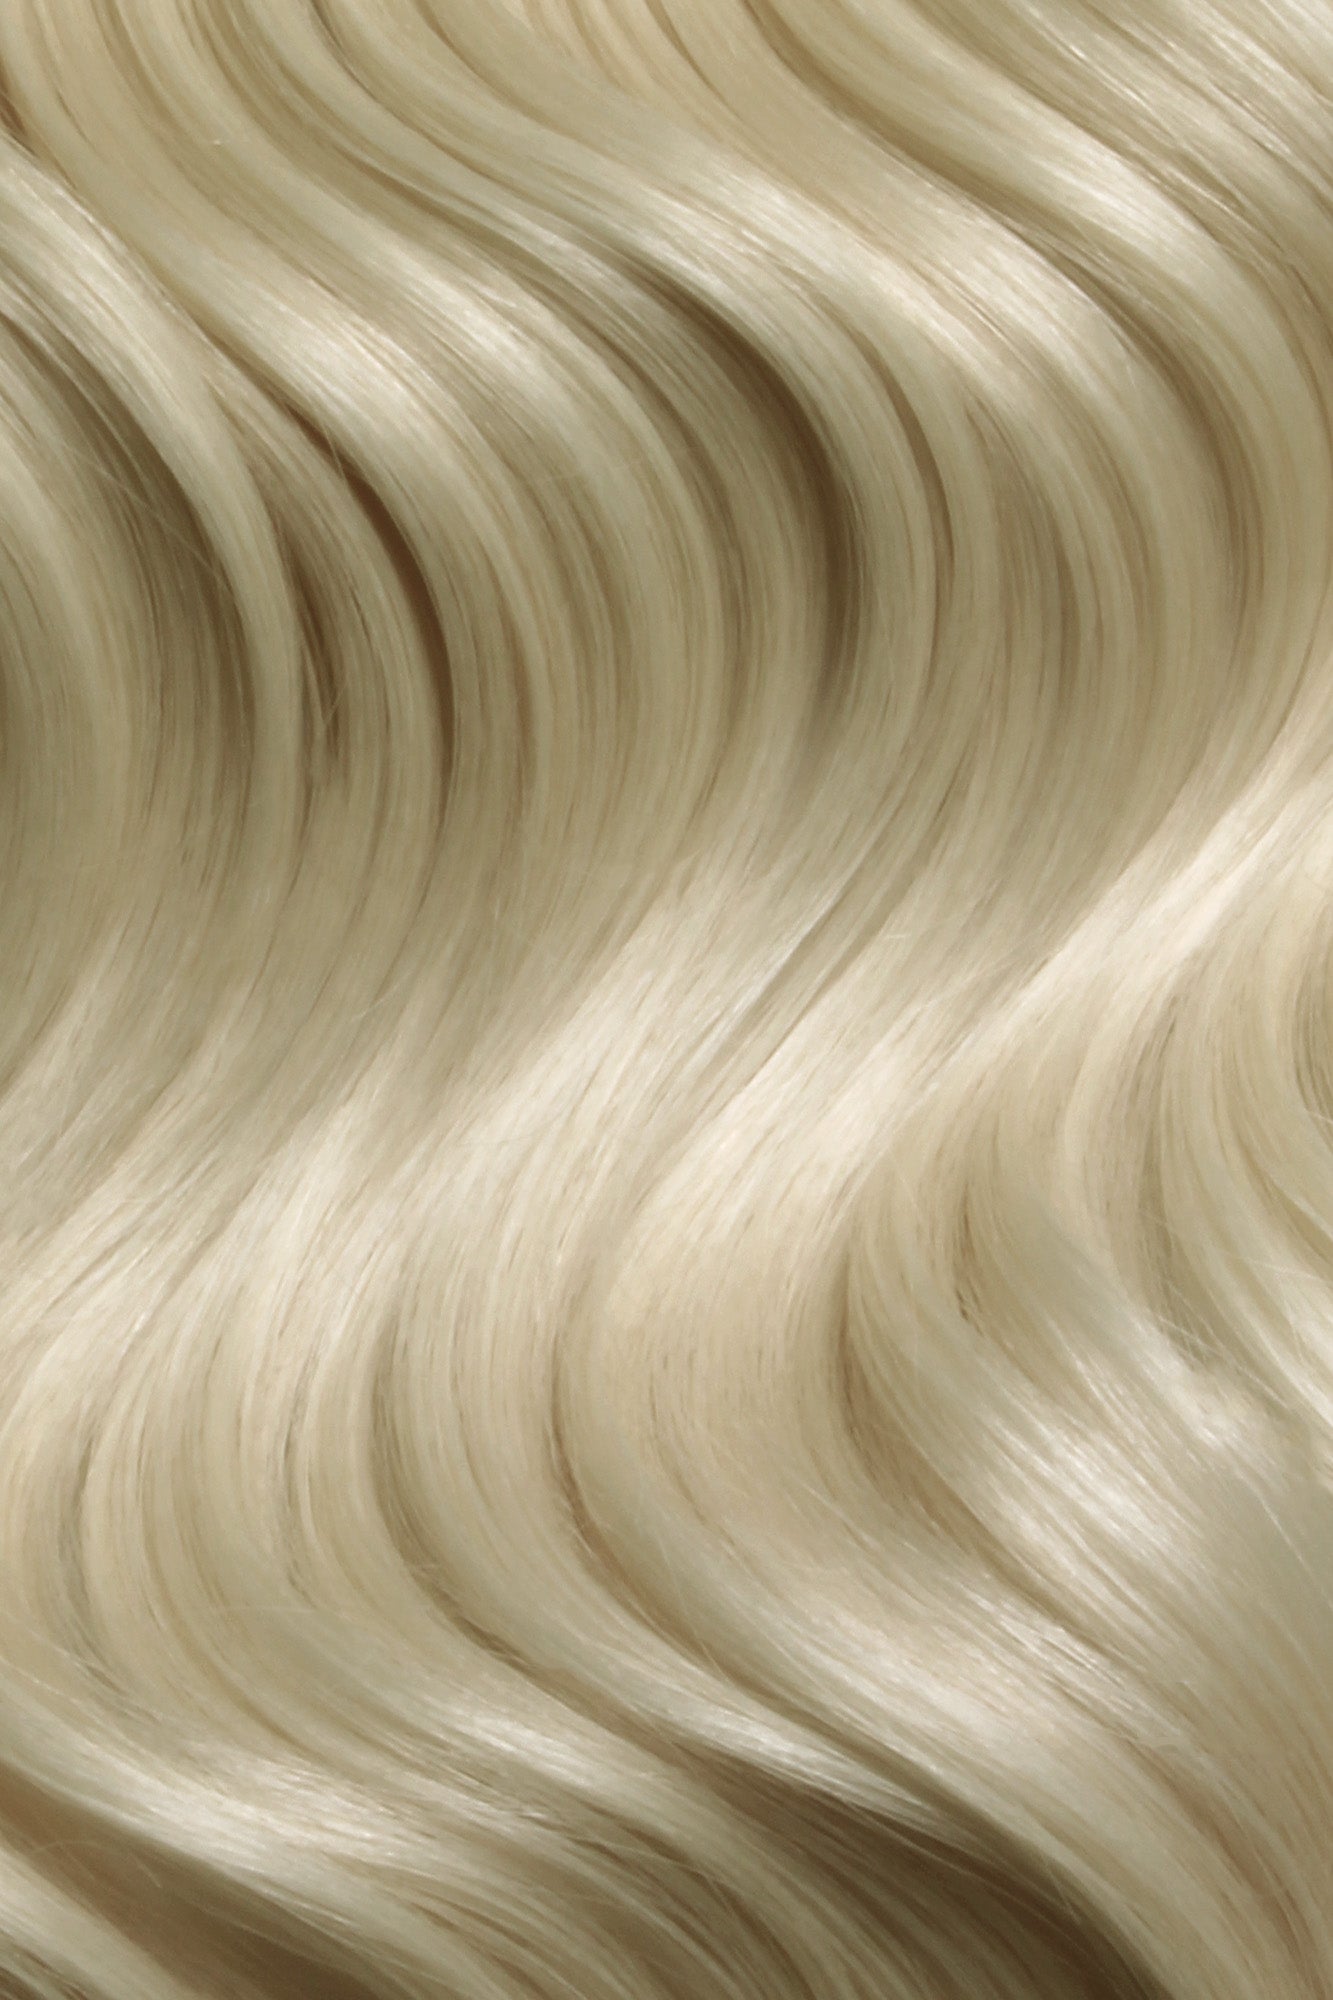 SEAMLESS® Flat Weft 20 Inches - SWAY Hair Extensions Sandy-Blonde-60 Natural SEAMLESS® Flat Weft 20 Inches extensions. Thin, flexible, and discreet. 100% Double Drawn Remy Human Hair. Versatile and reusable